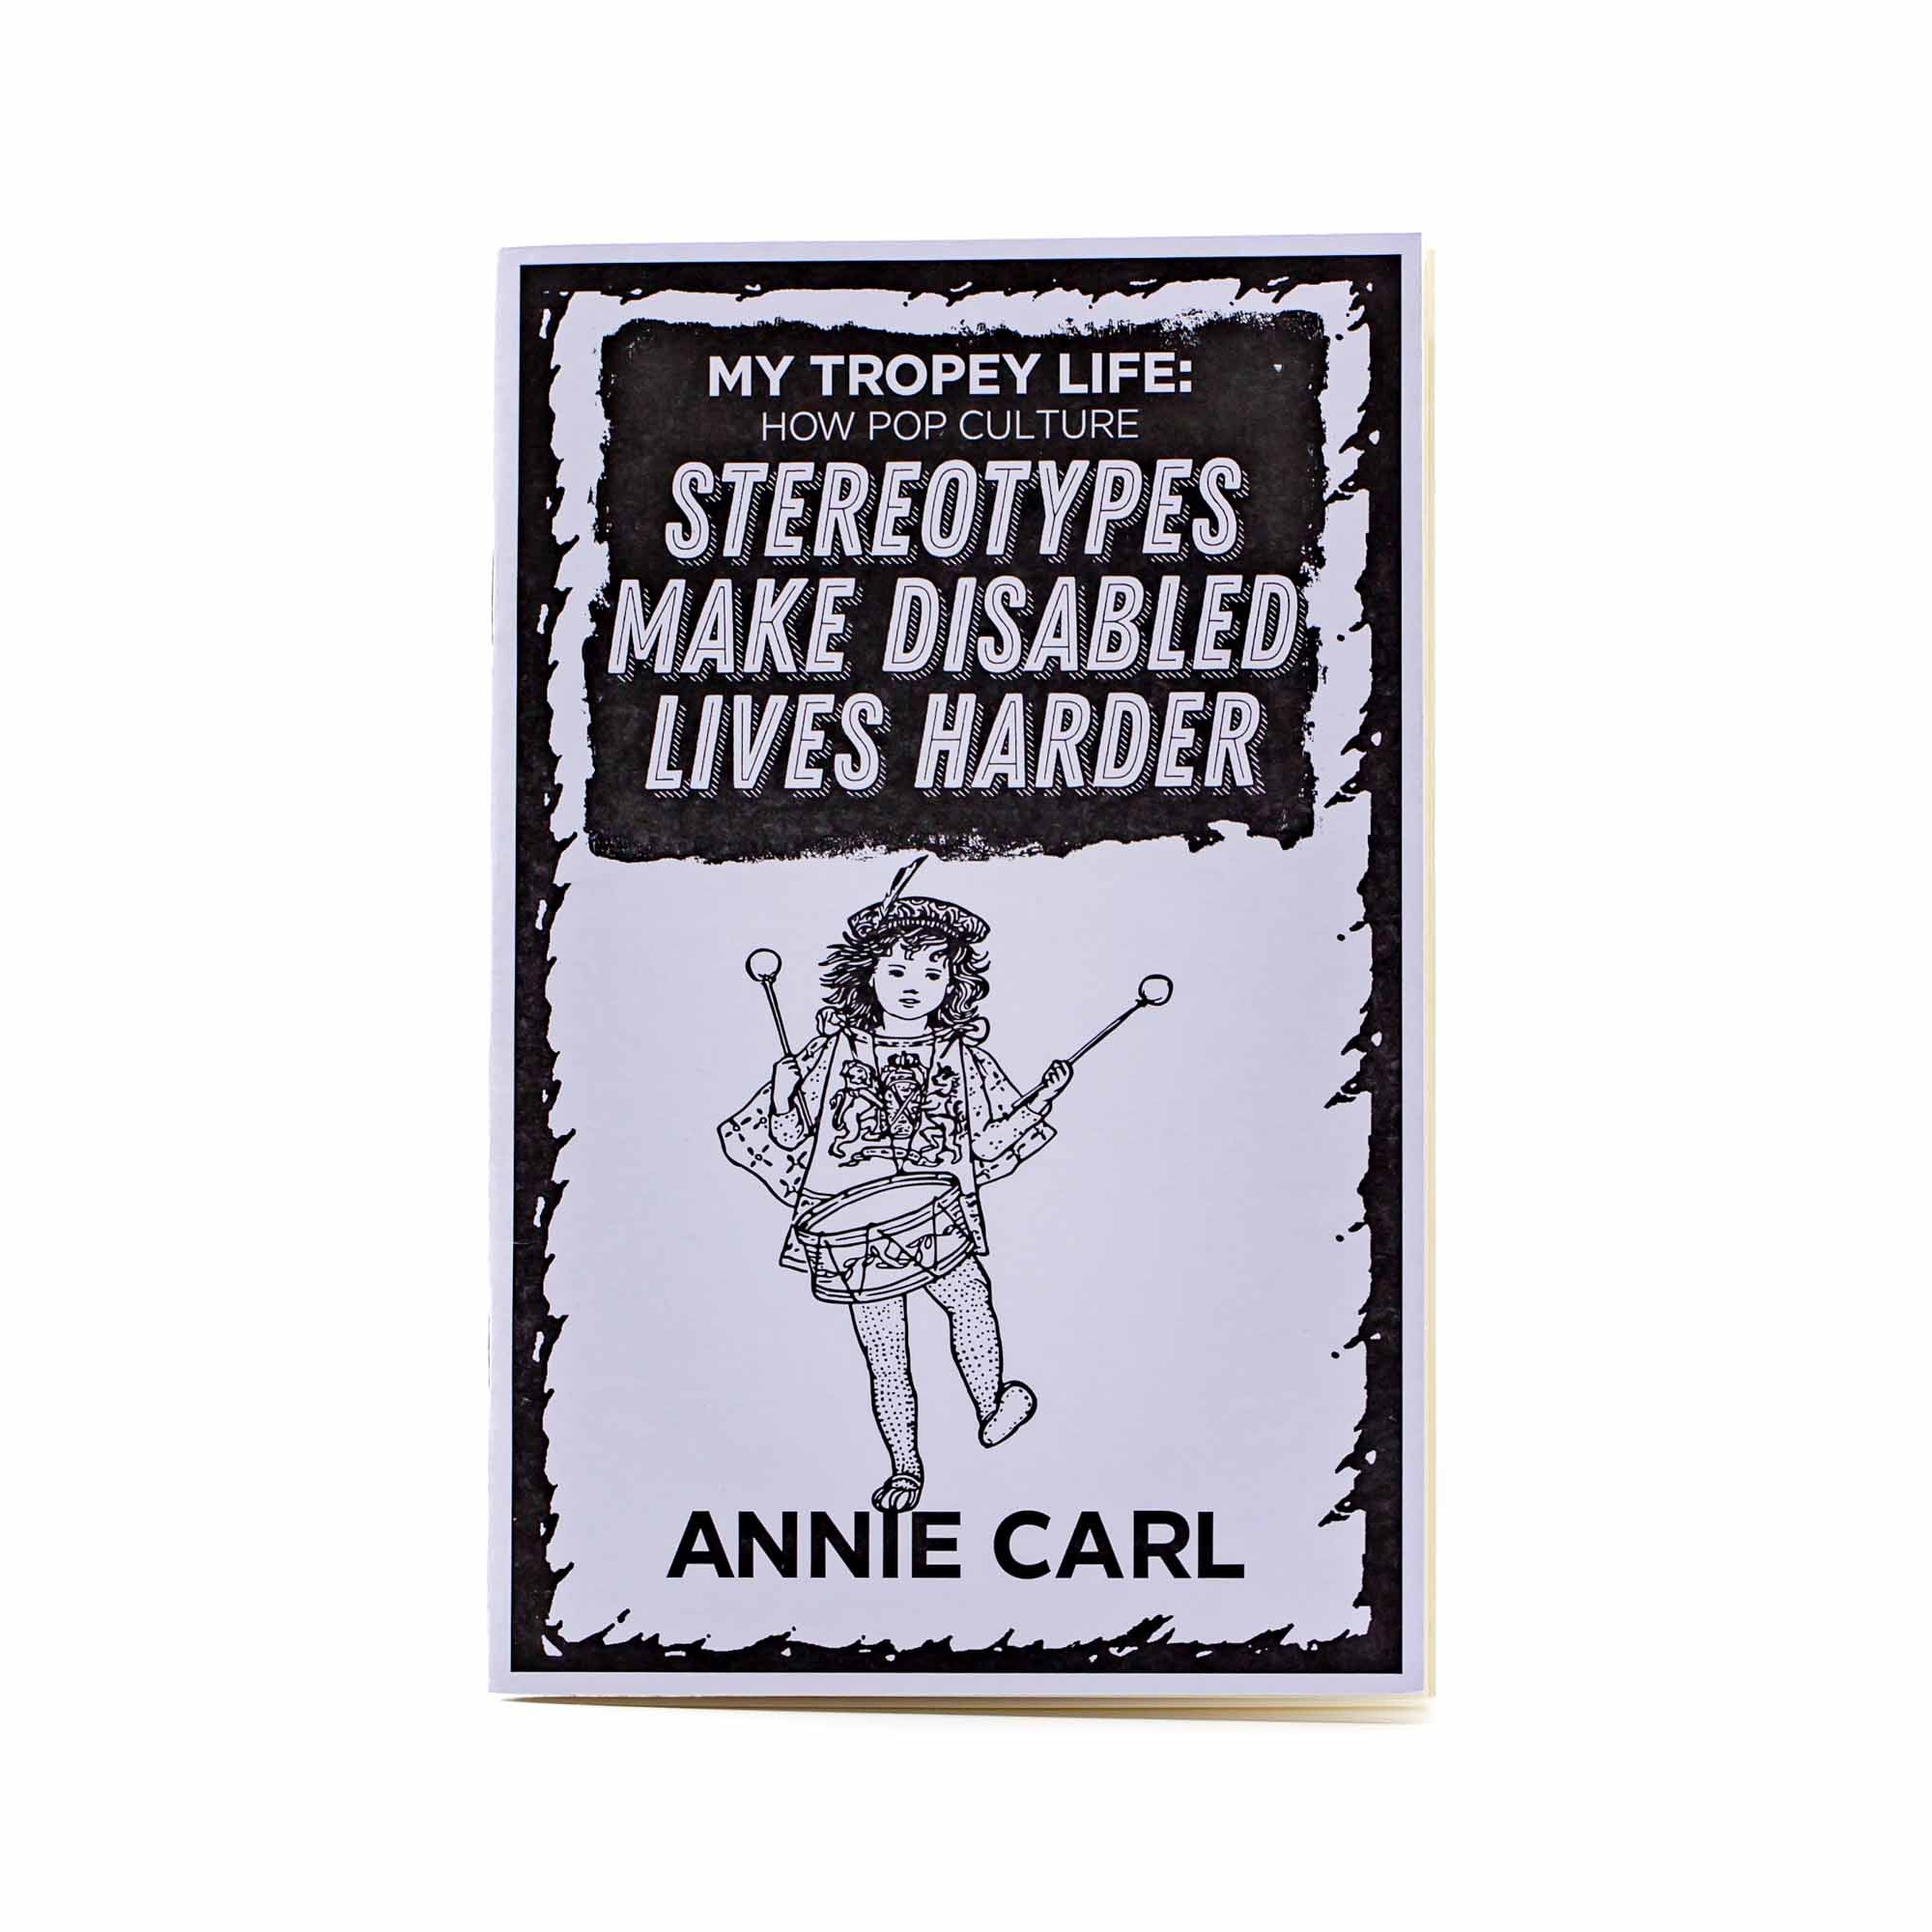 My Tropey Life: How Stereotypes Make Disabled Lives Harder by Annie Carl - Mortise And Tenon